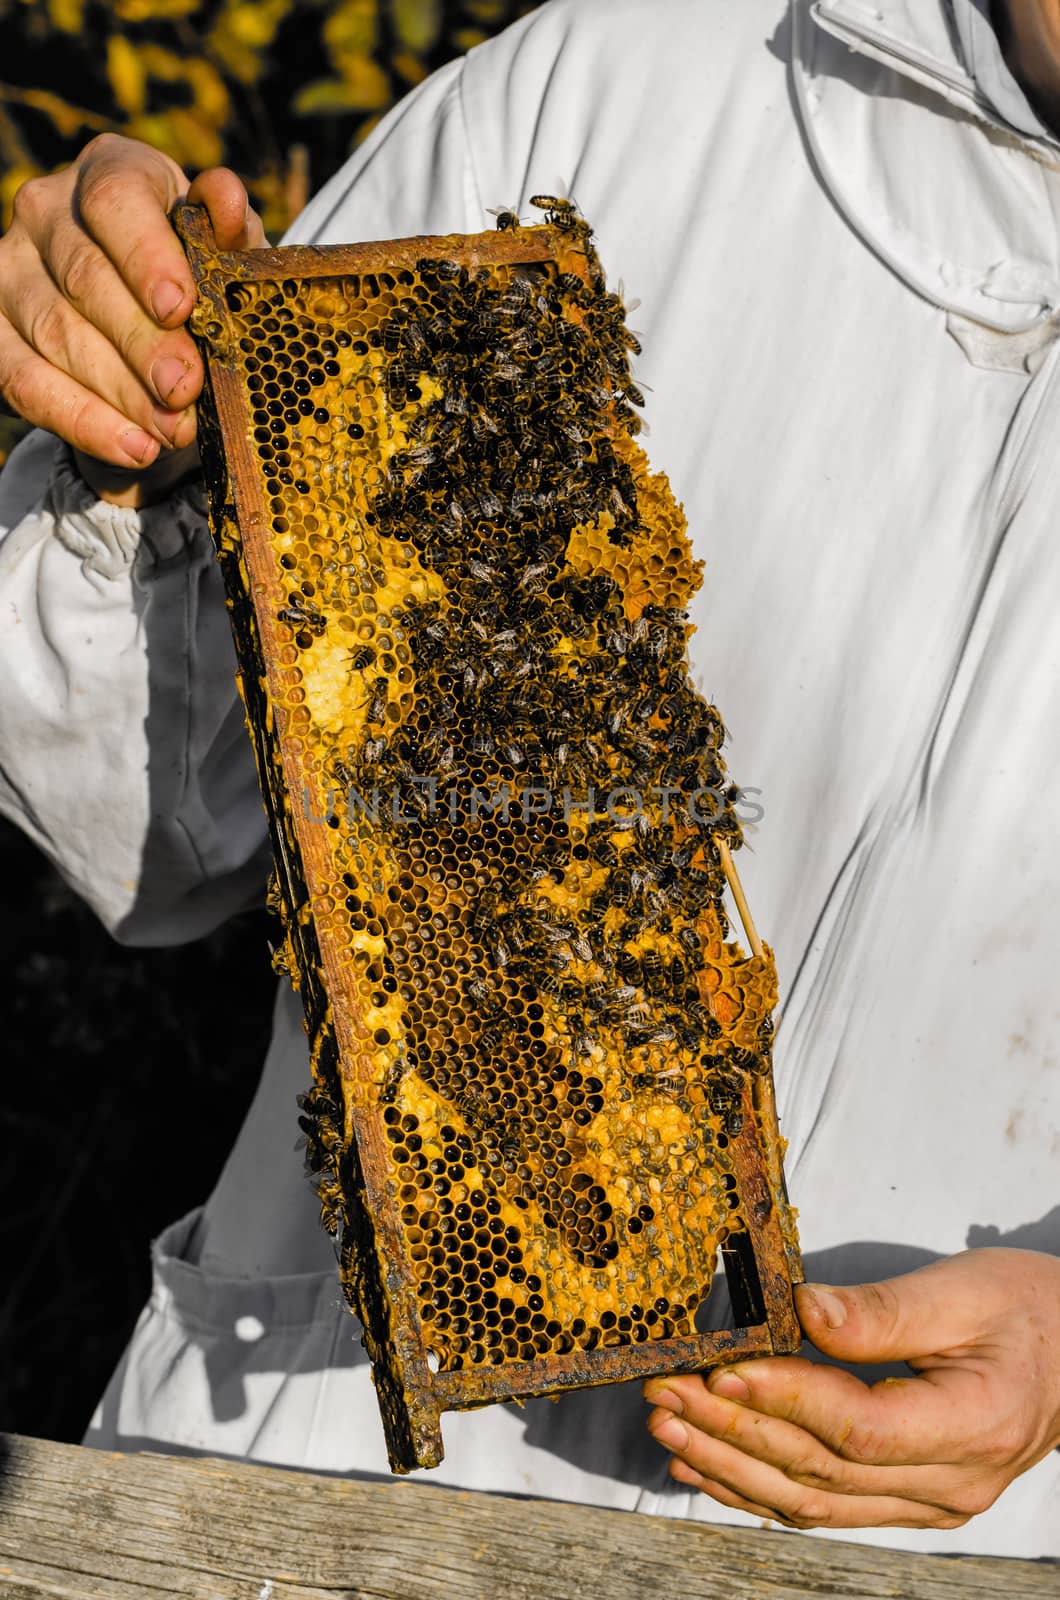 Beekeeper showing honeycomb frame by Attila